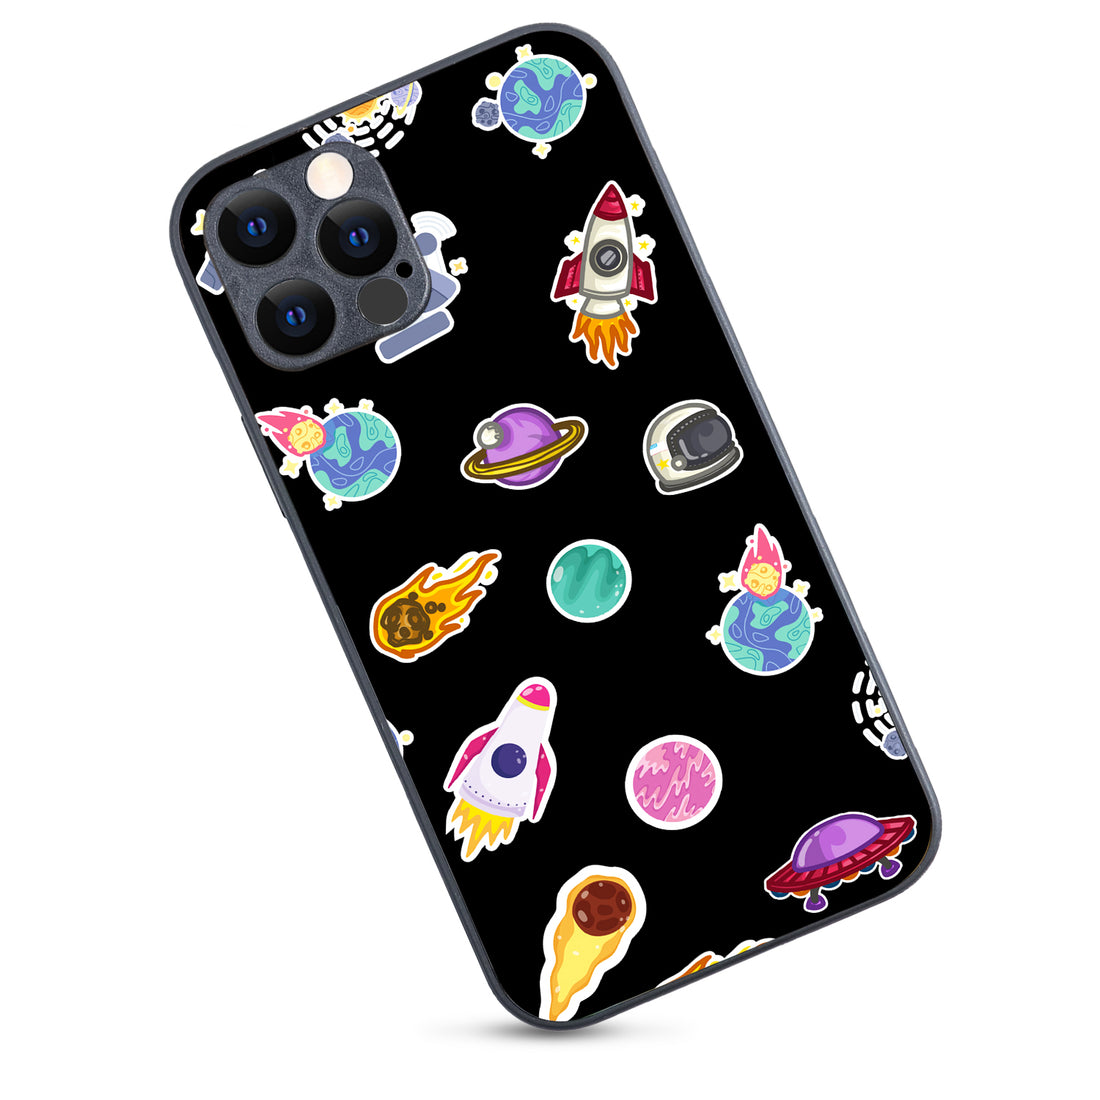 Stickers Space iPhone 12 Pro Case